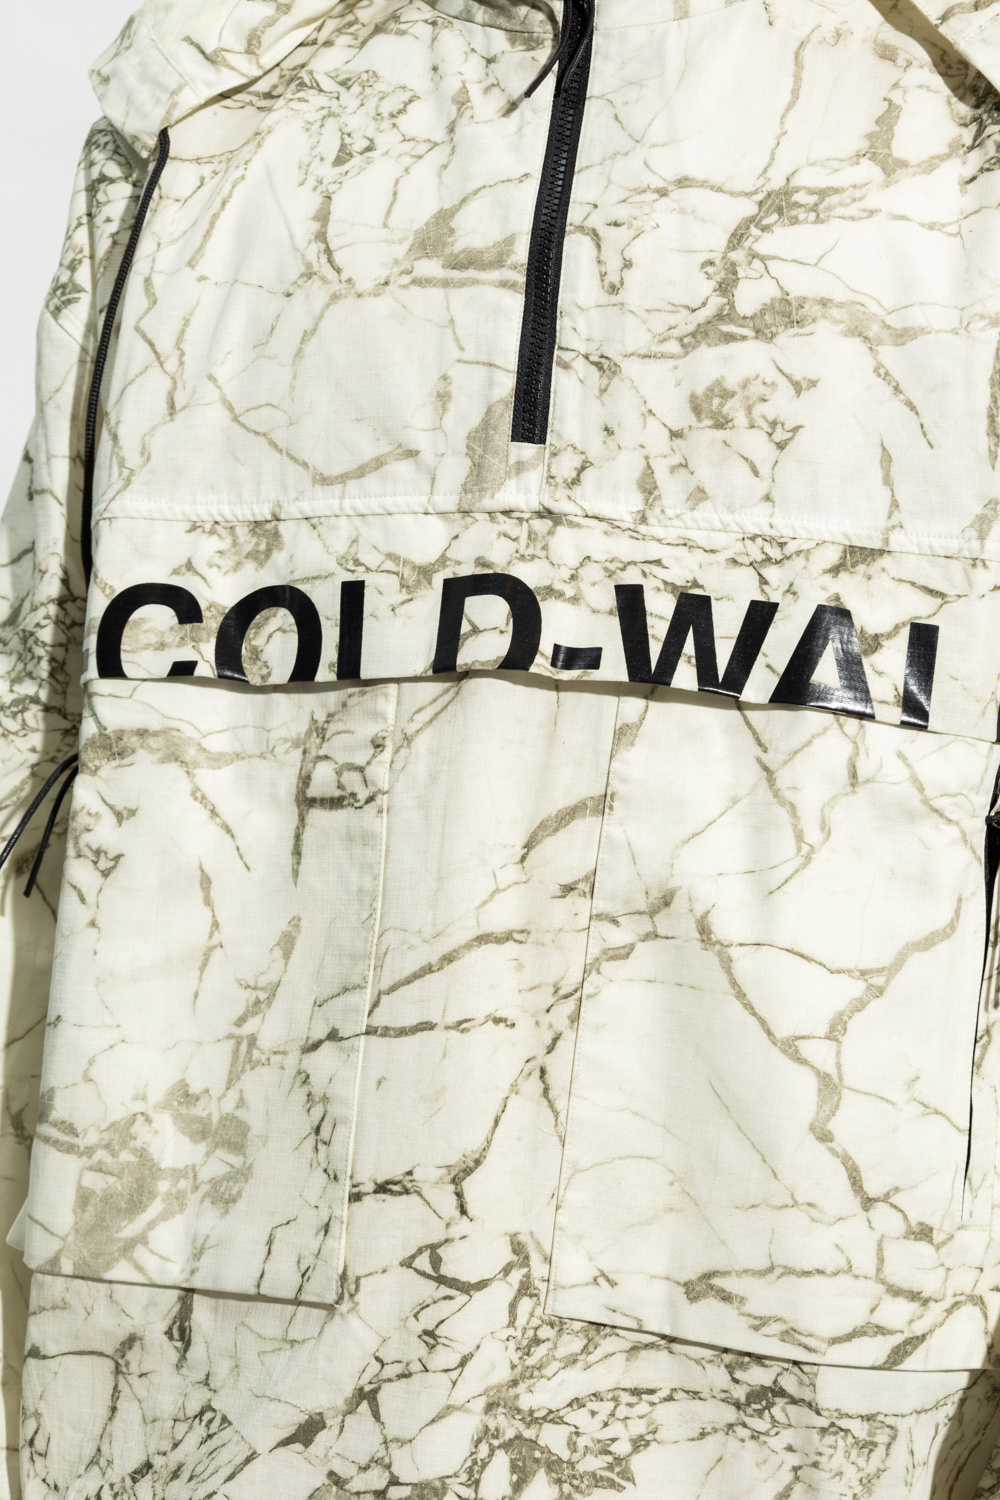 A-COLD-WALL* Hooded jacket